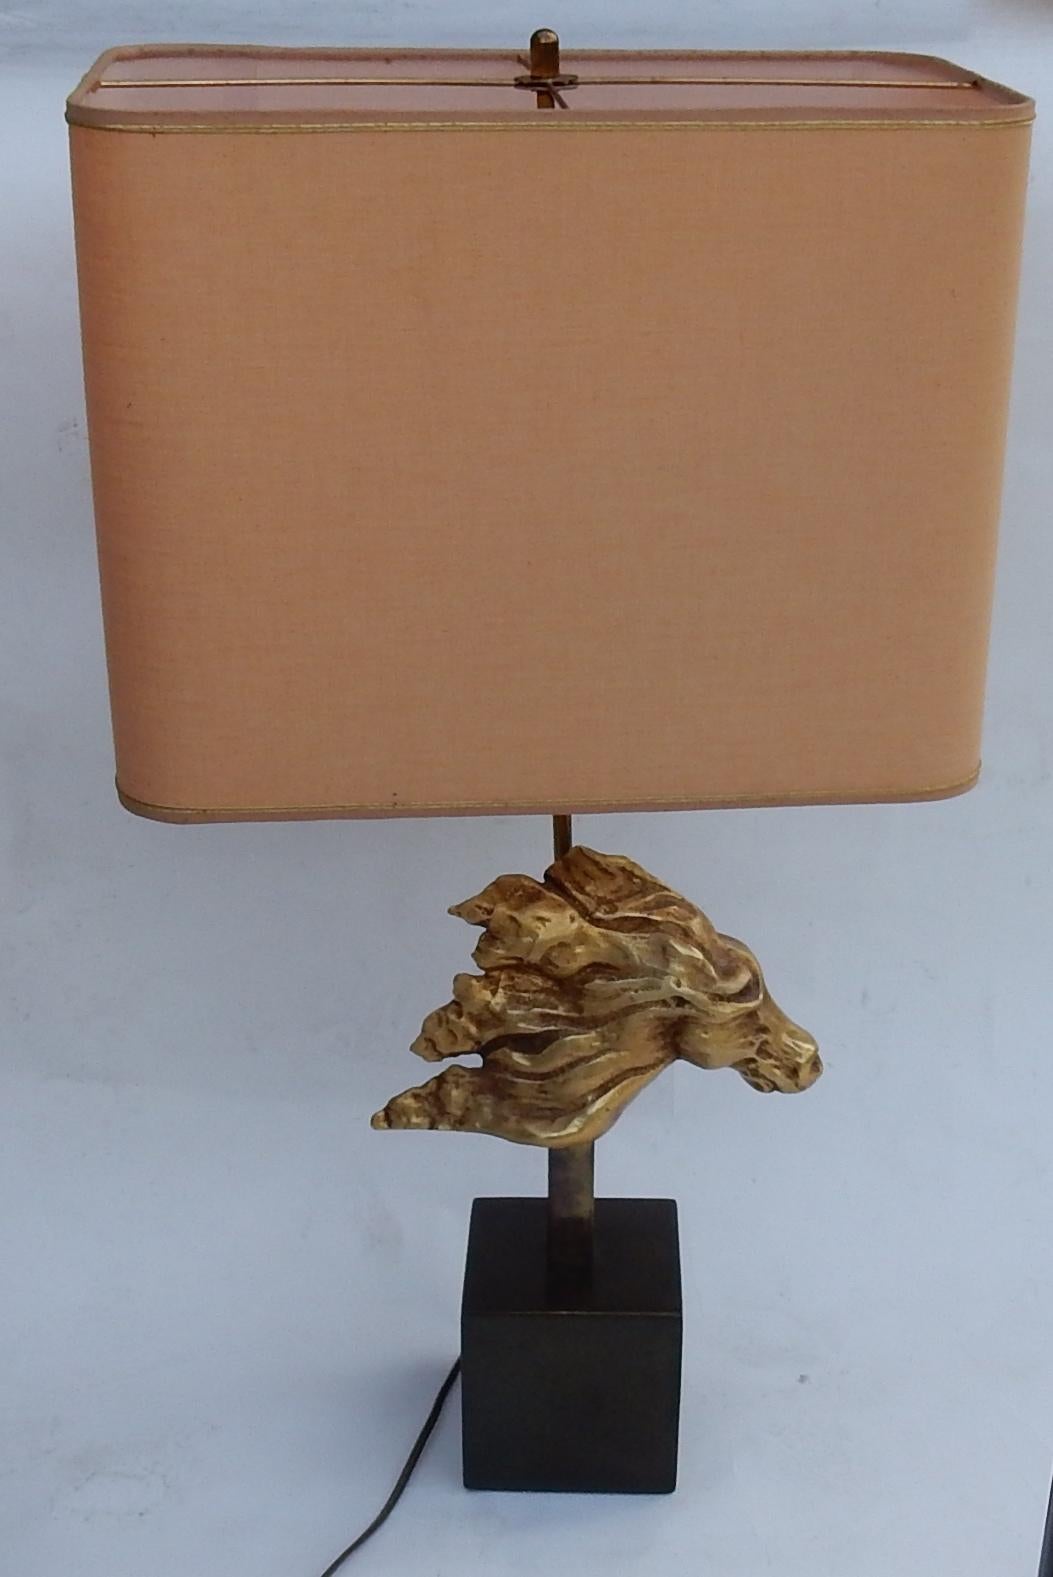 Lamp with horse head decoration in the wind, the base is in patinated brass, work in the style of Duval Brasseur unsigned, good condition
Measures: Height 73 cm
width 26 cm
Base 12 x 12 x H 12 cm
Height of the head 17 cm
2 bulbs.